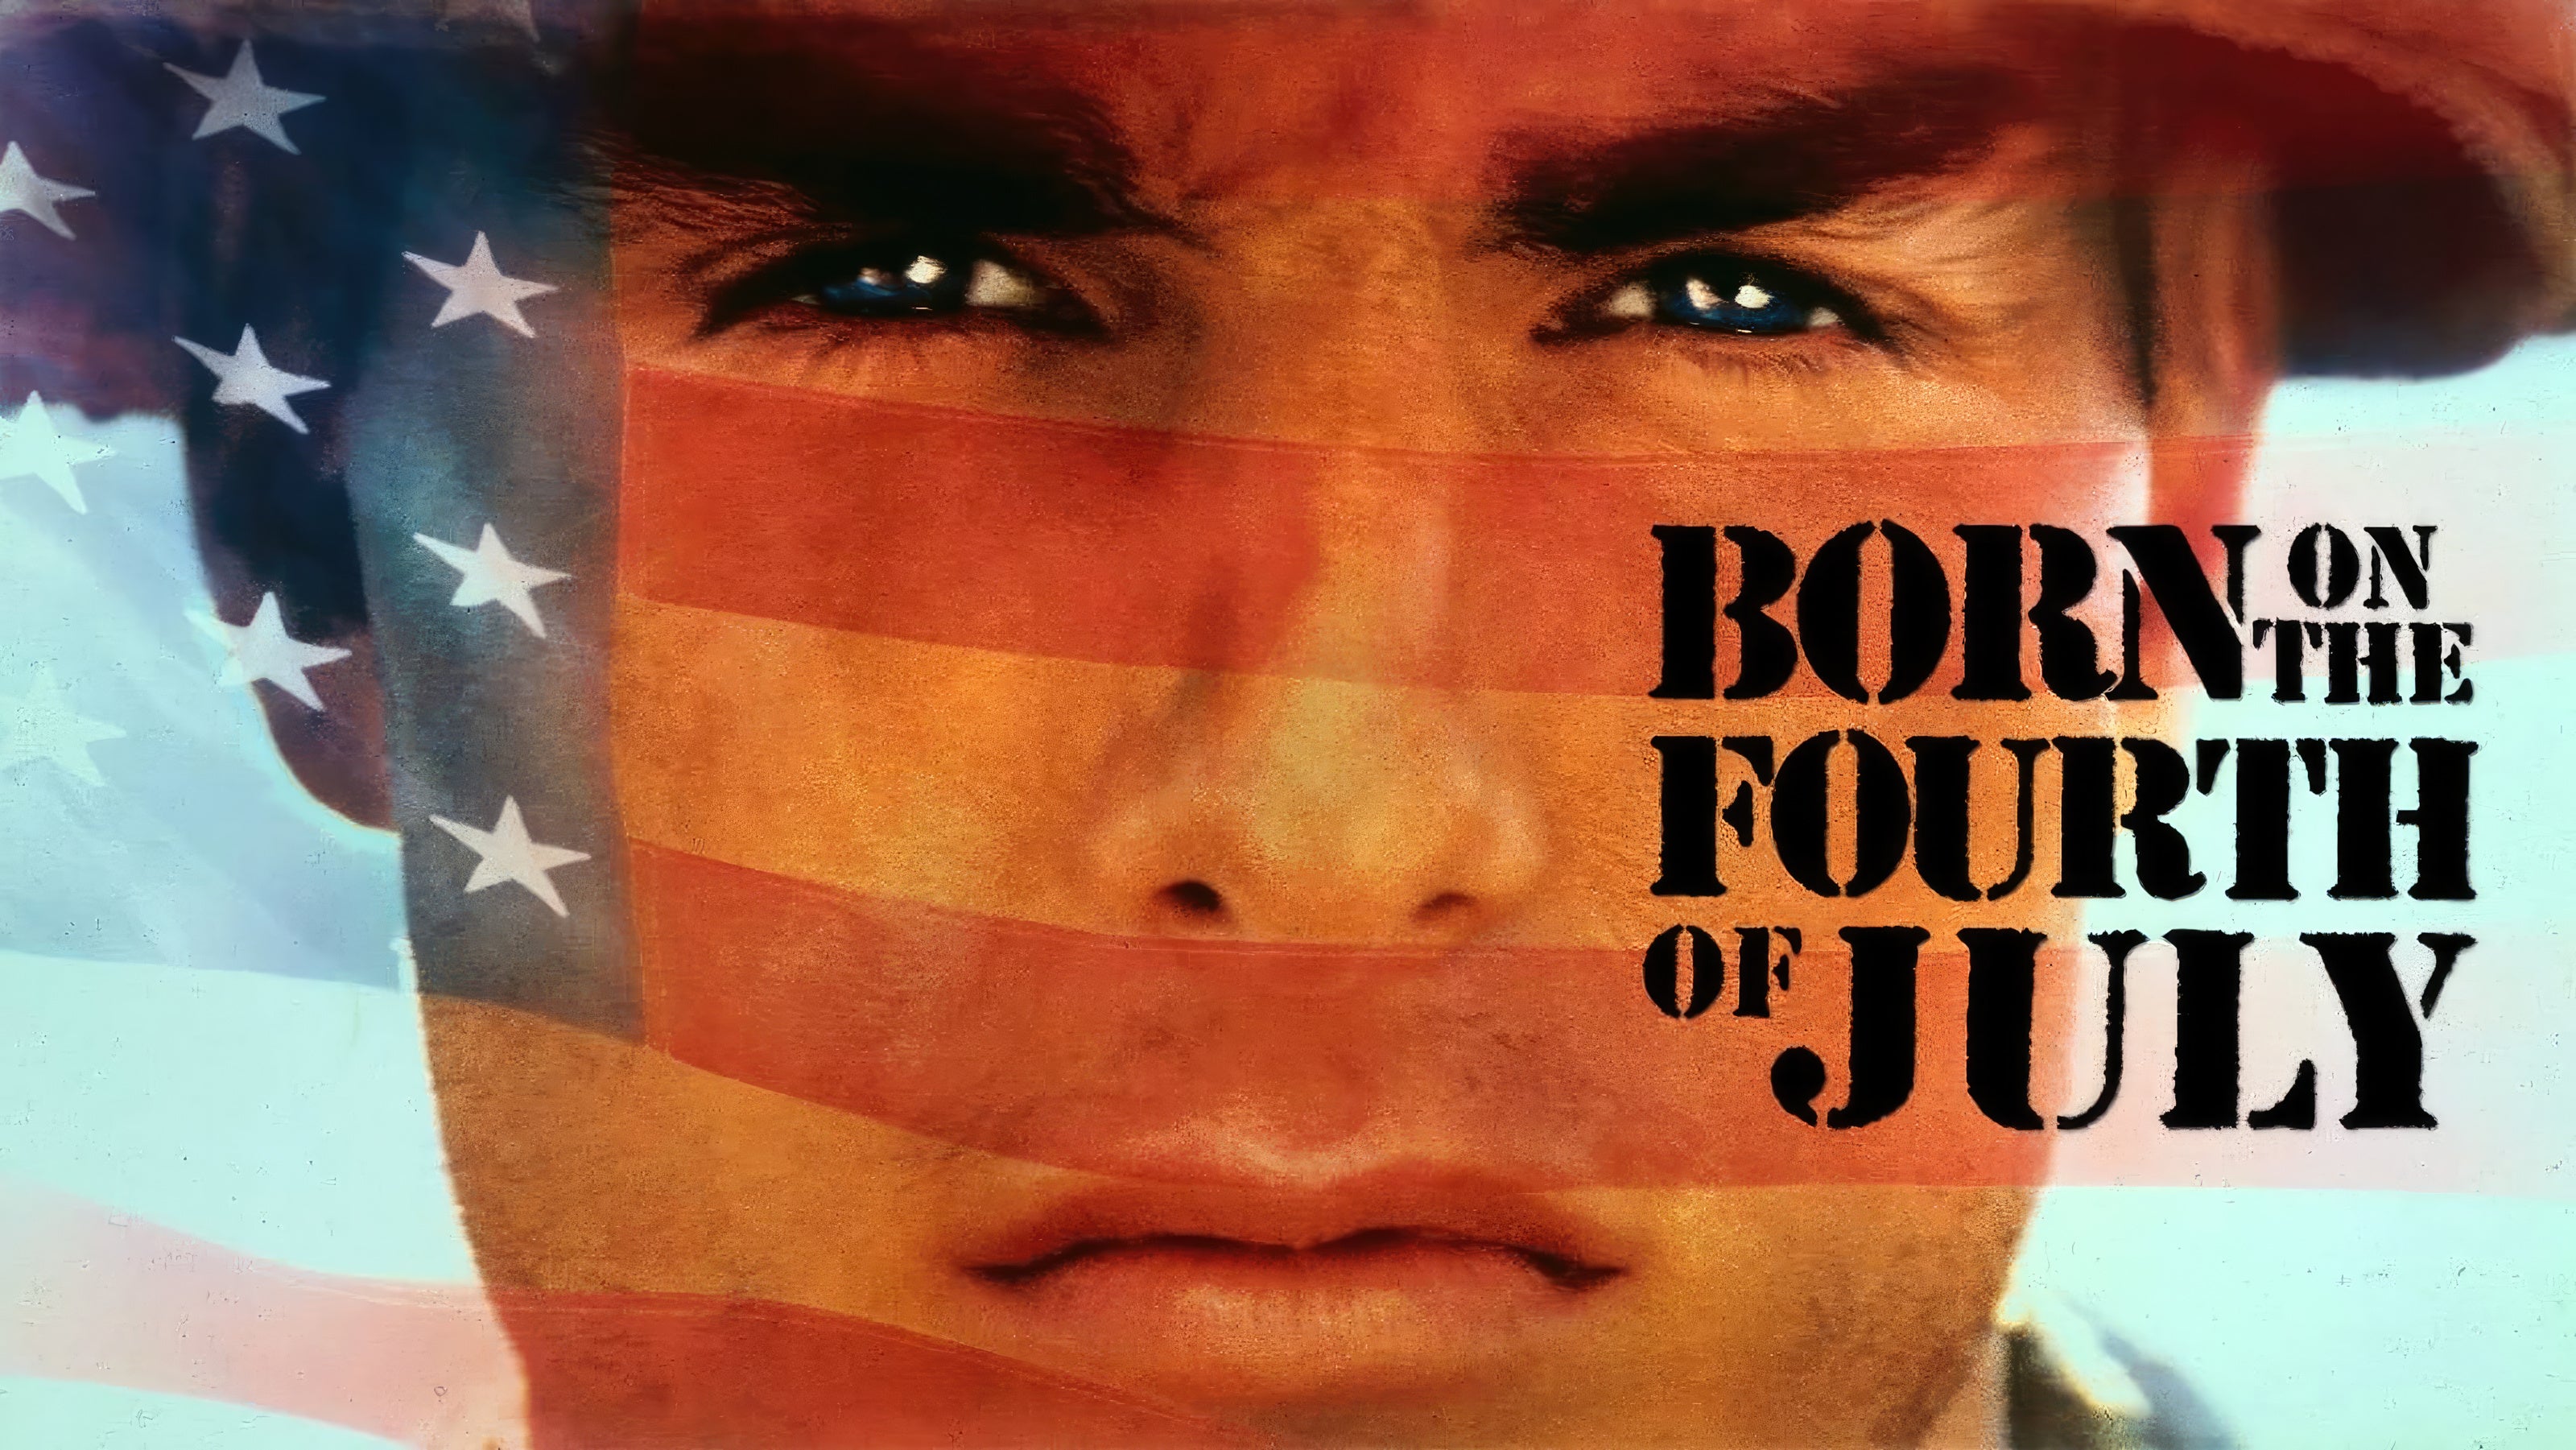 Born on the Fourth of July Script Screenplay - Image of Movie Film Poster